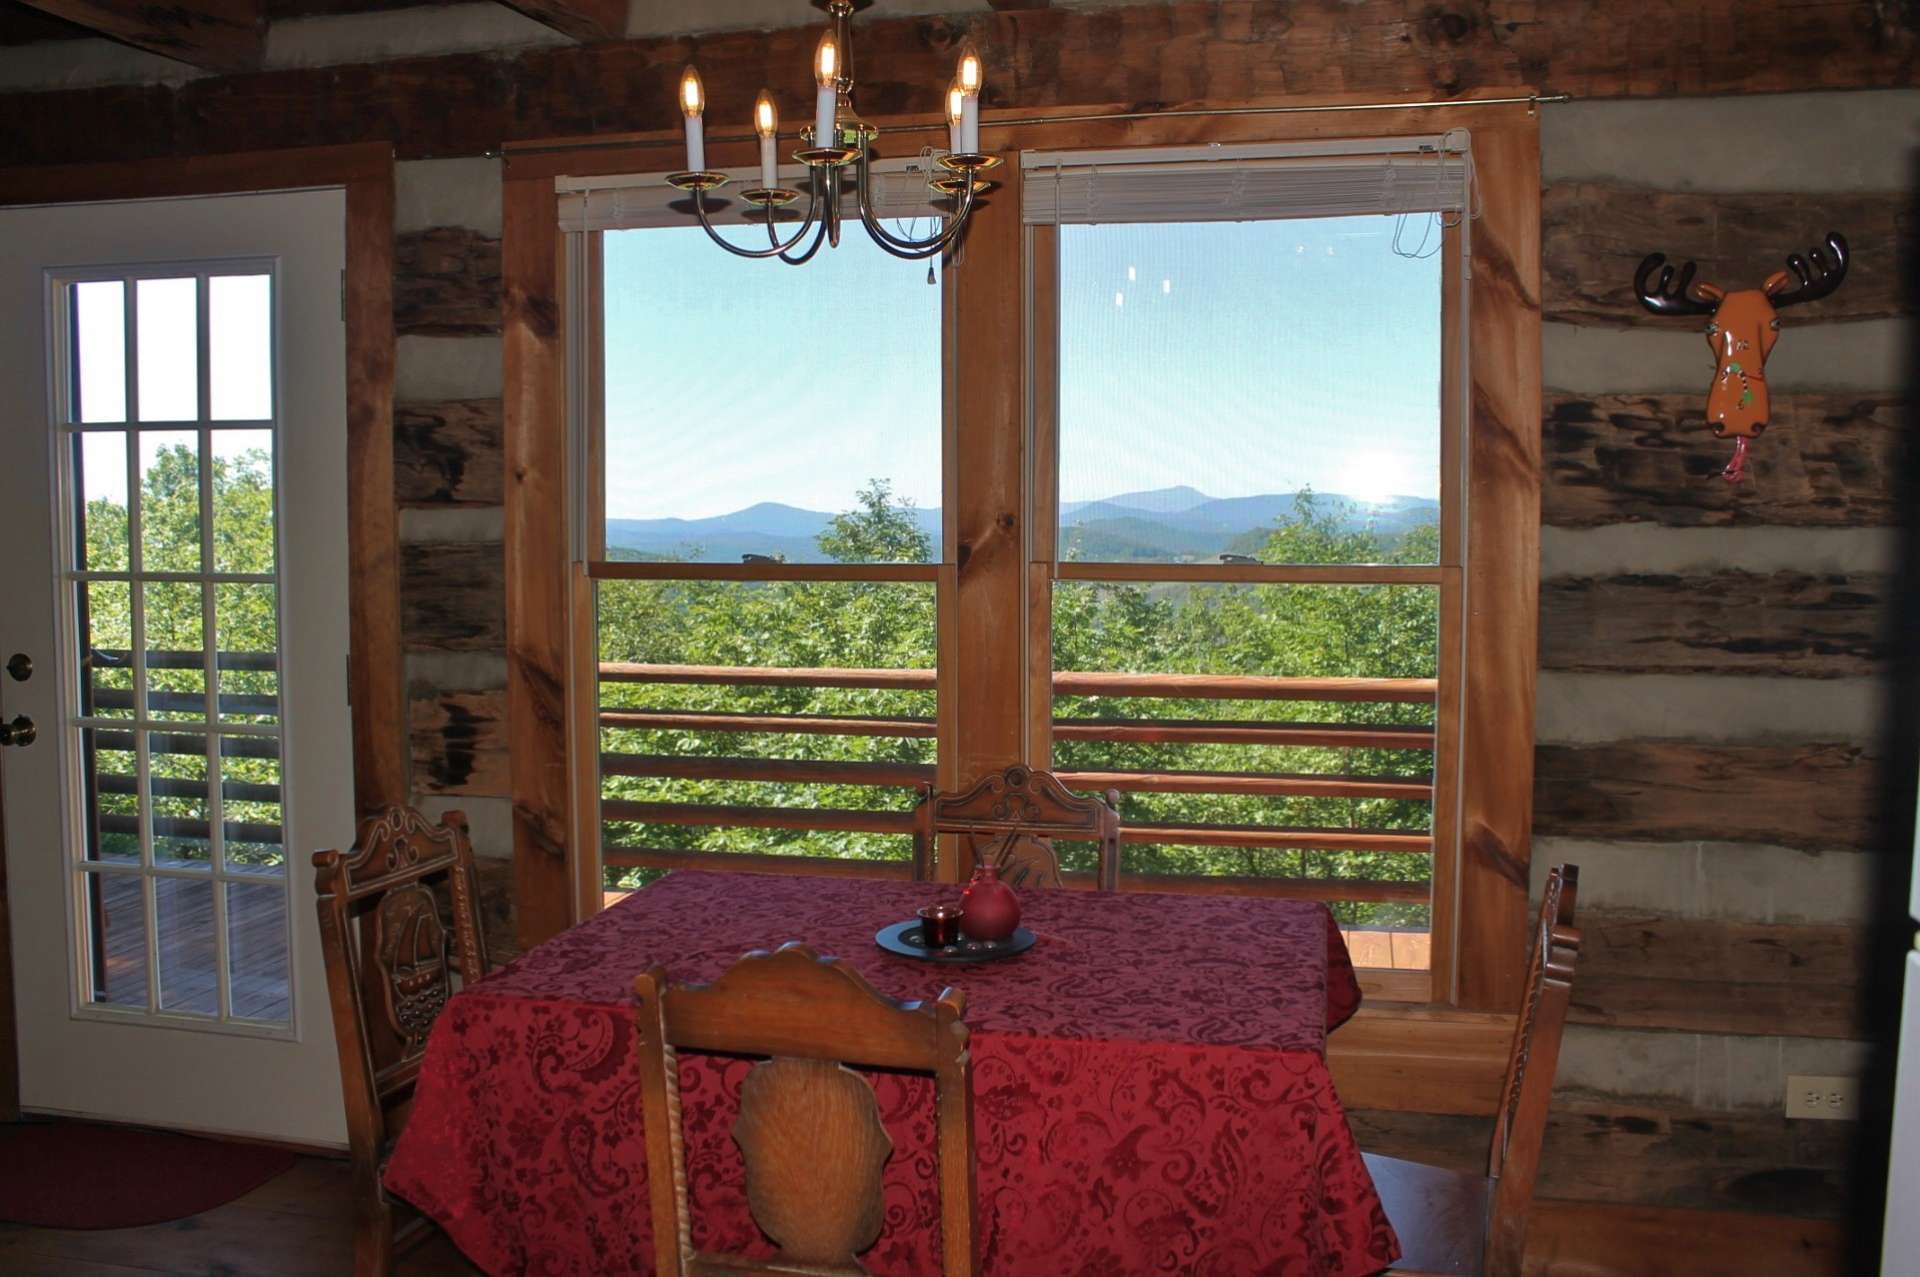 The dining area allows enjoyment of the views and perfect for entertaining dinner guests throughout all four seasons in the North Carolina Mountains.